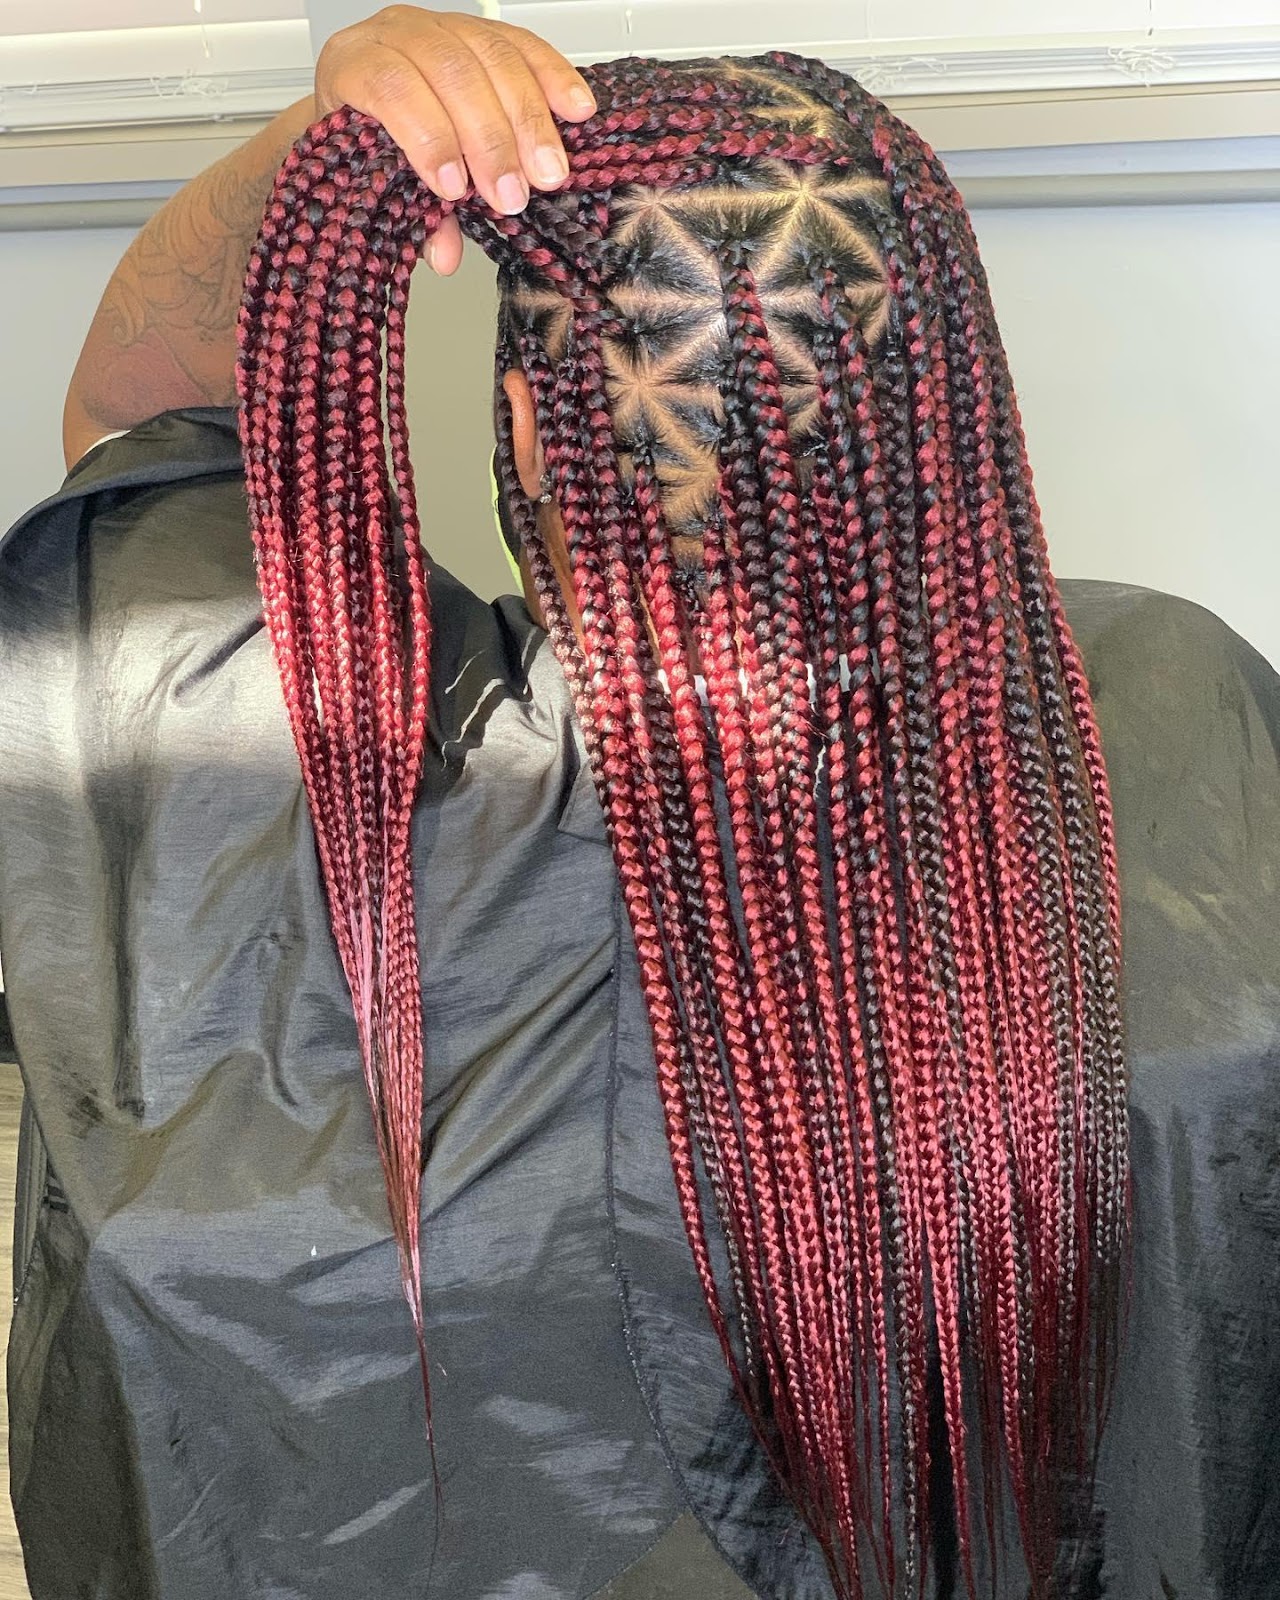 Medium knotless braids with special partings